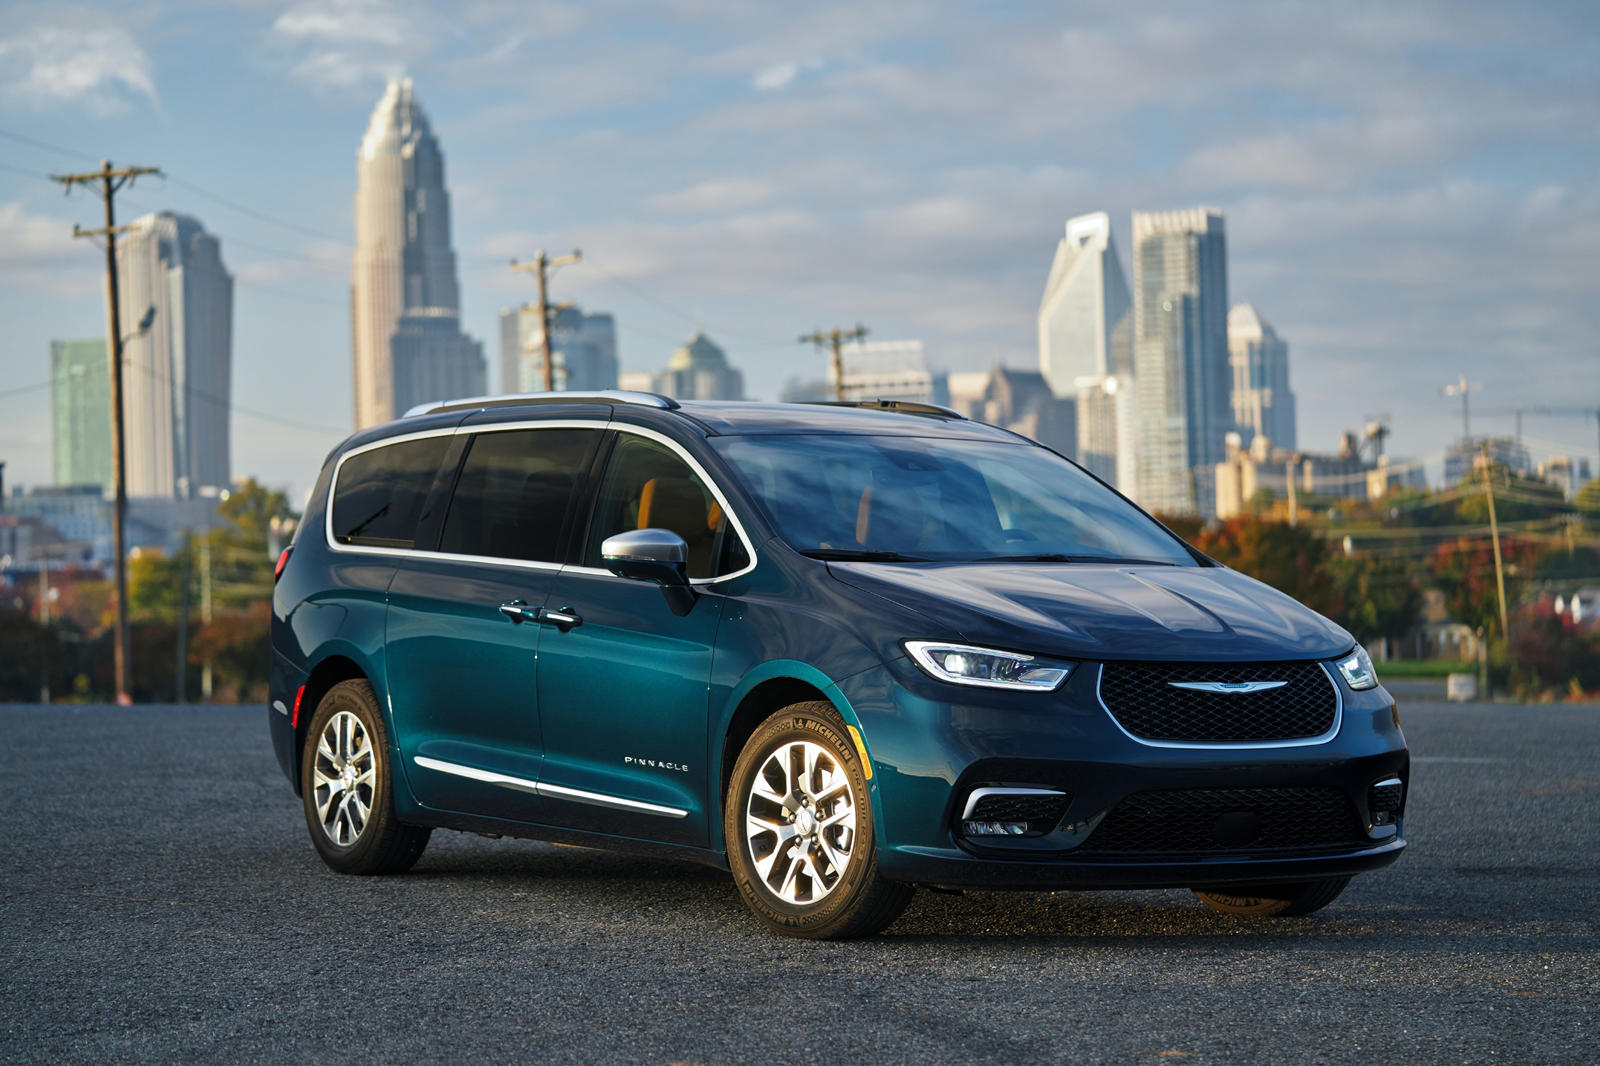 Used Chrysler Pacifica Hybrid. Check Pacifica Hybrid for sale in USA